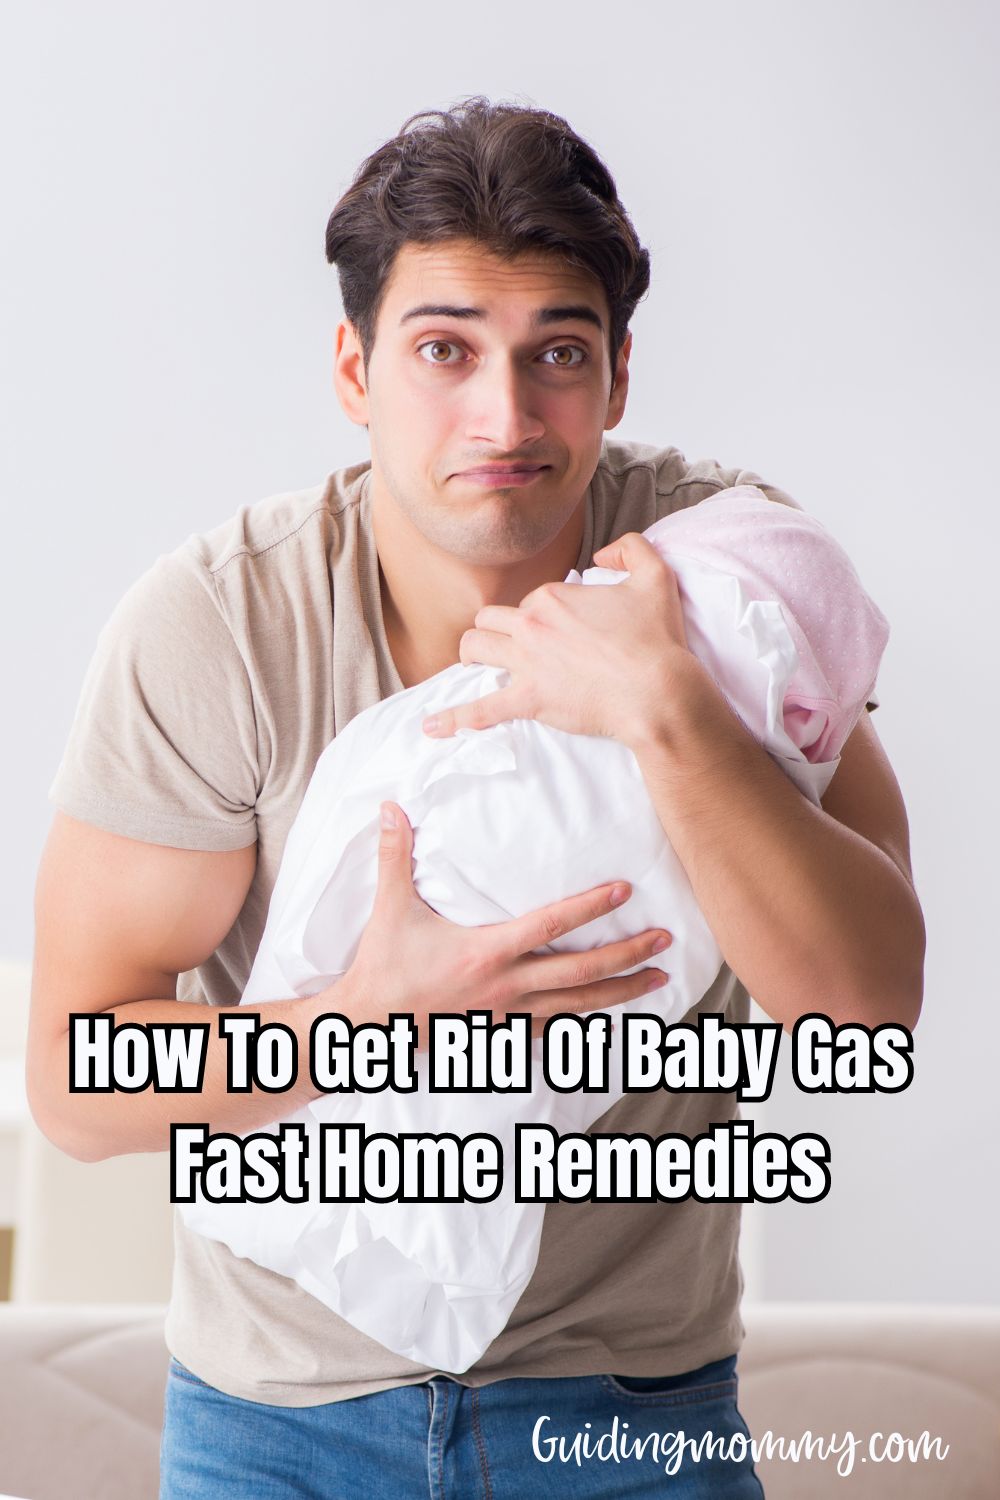 How To Get Rid Of Baby Gas Fast Home Remedies 